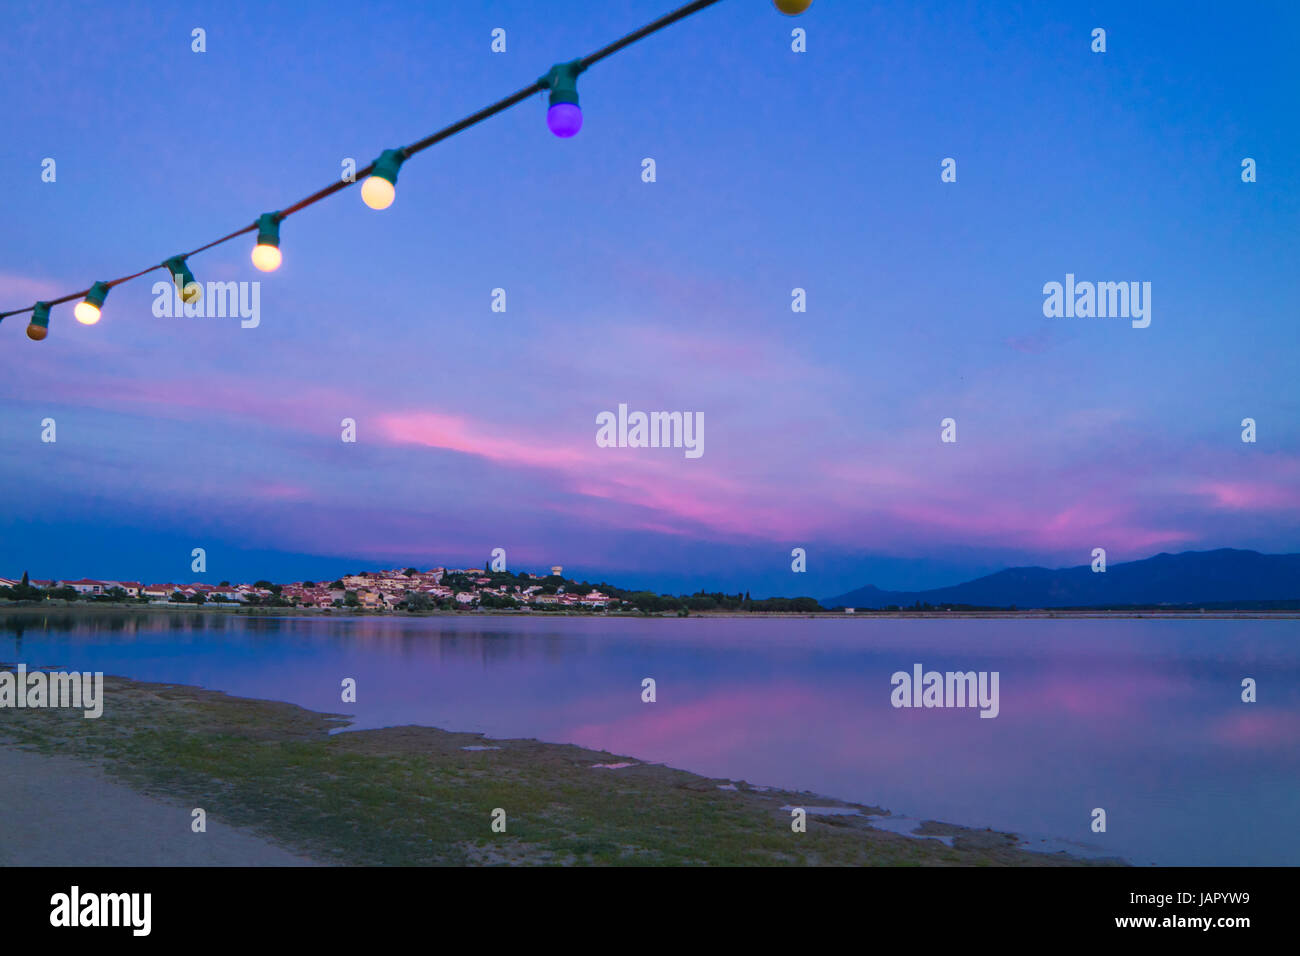 Festive outdoor electric light bulbs under blue sky at dusk in front of a french village and lake Stock Photo